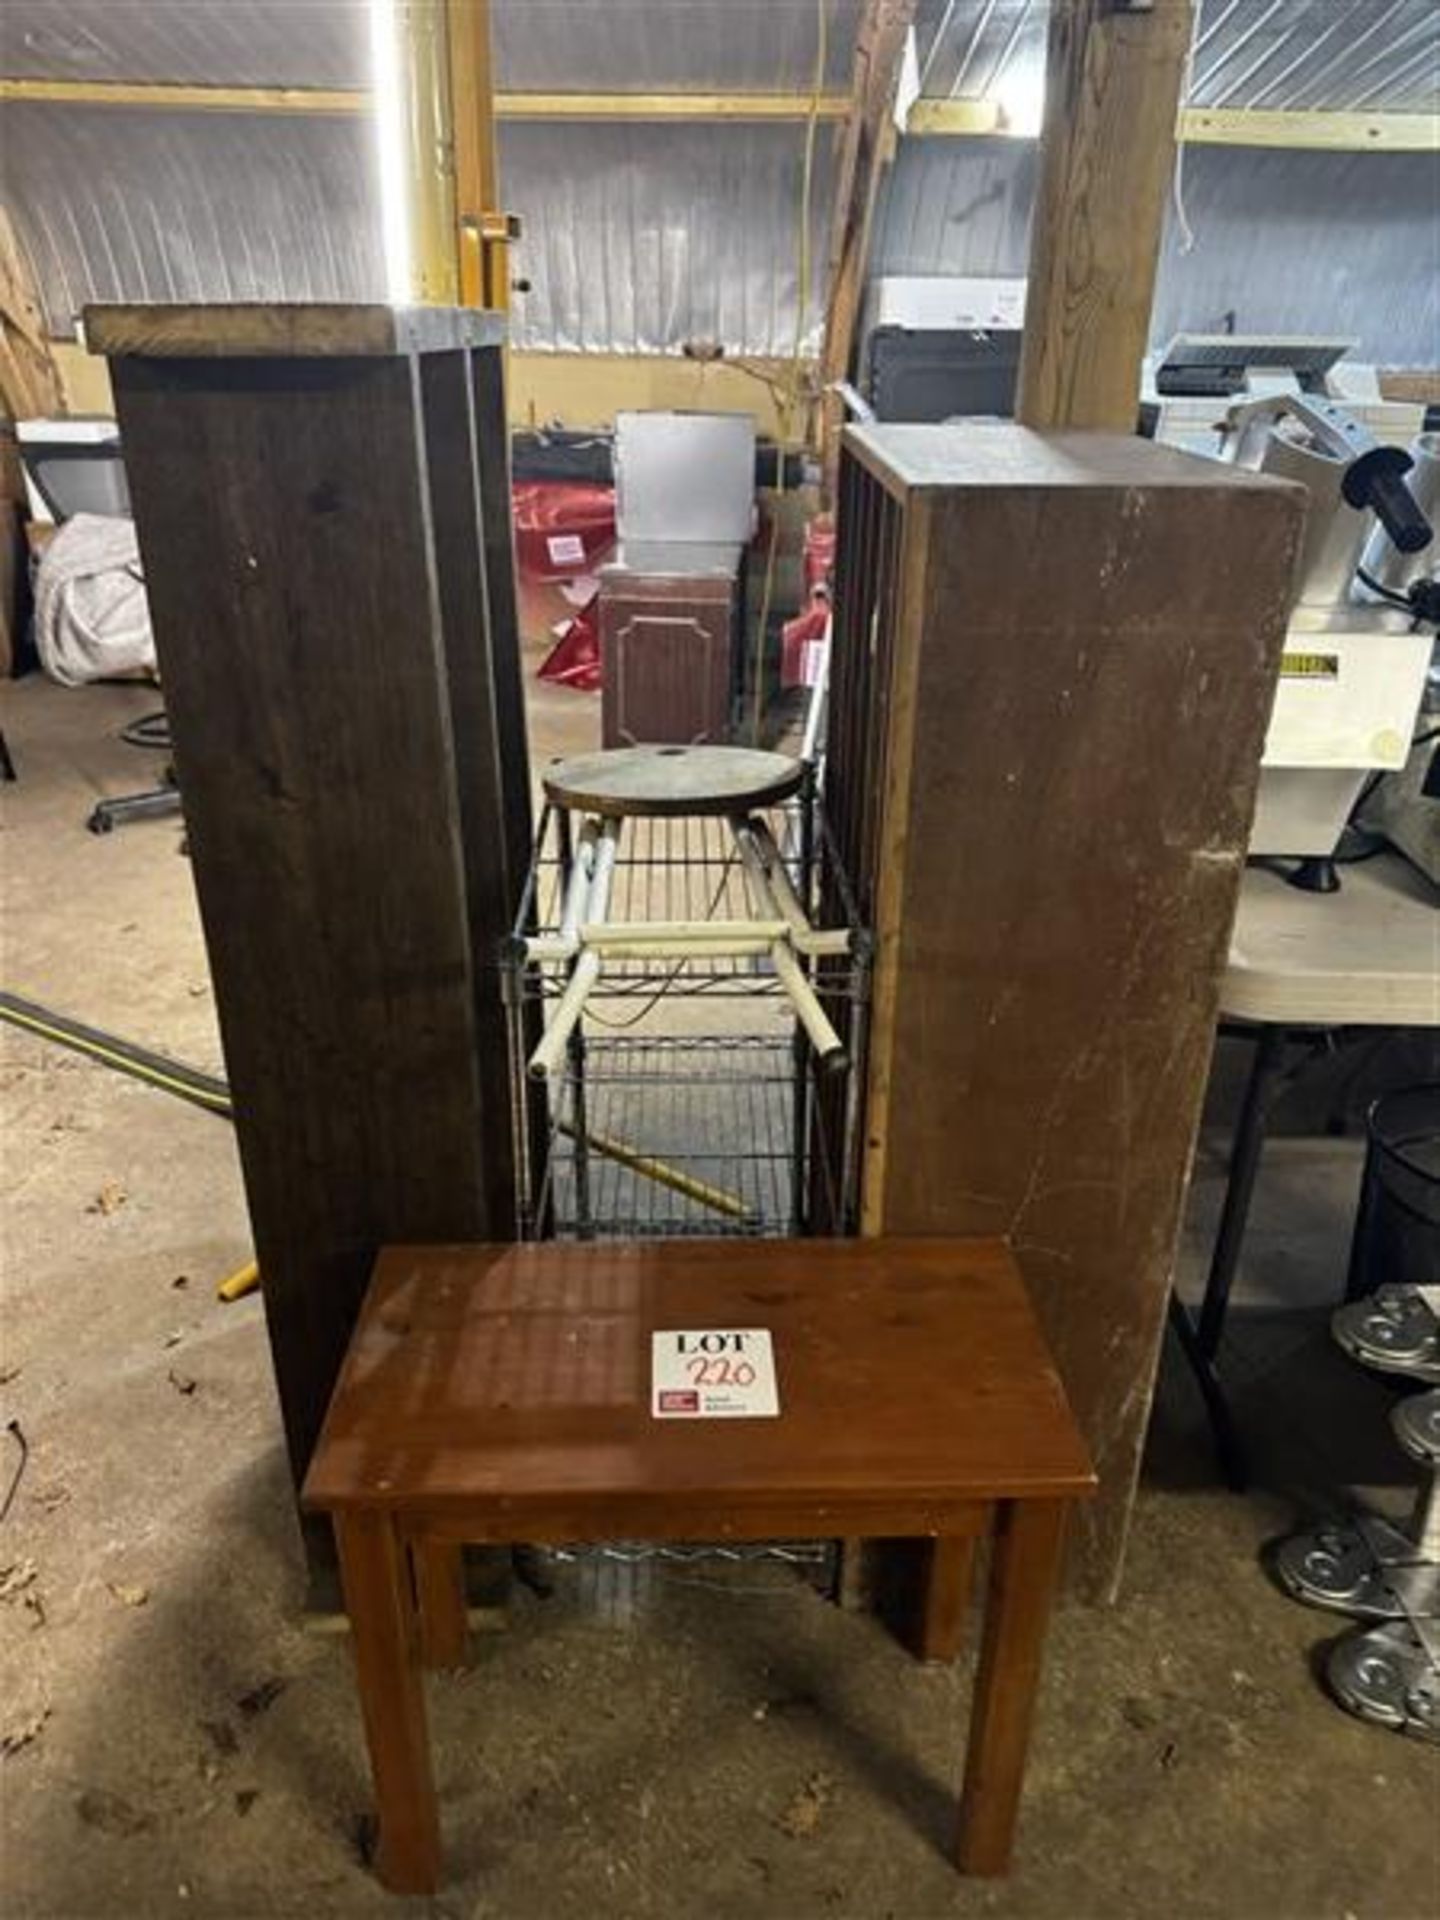 Assorted LOT to include wooden shelves, small table, wire rack, chair & wooden display/storage unit